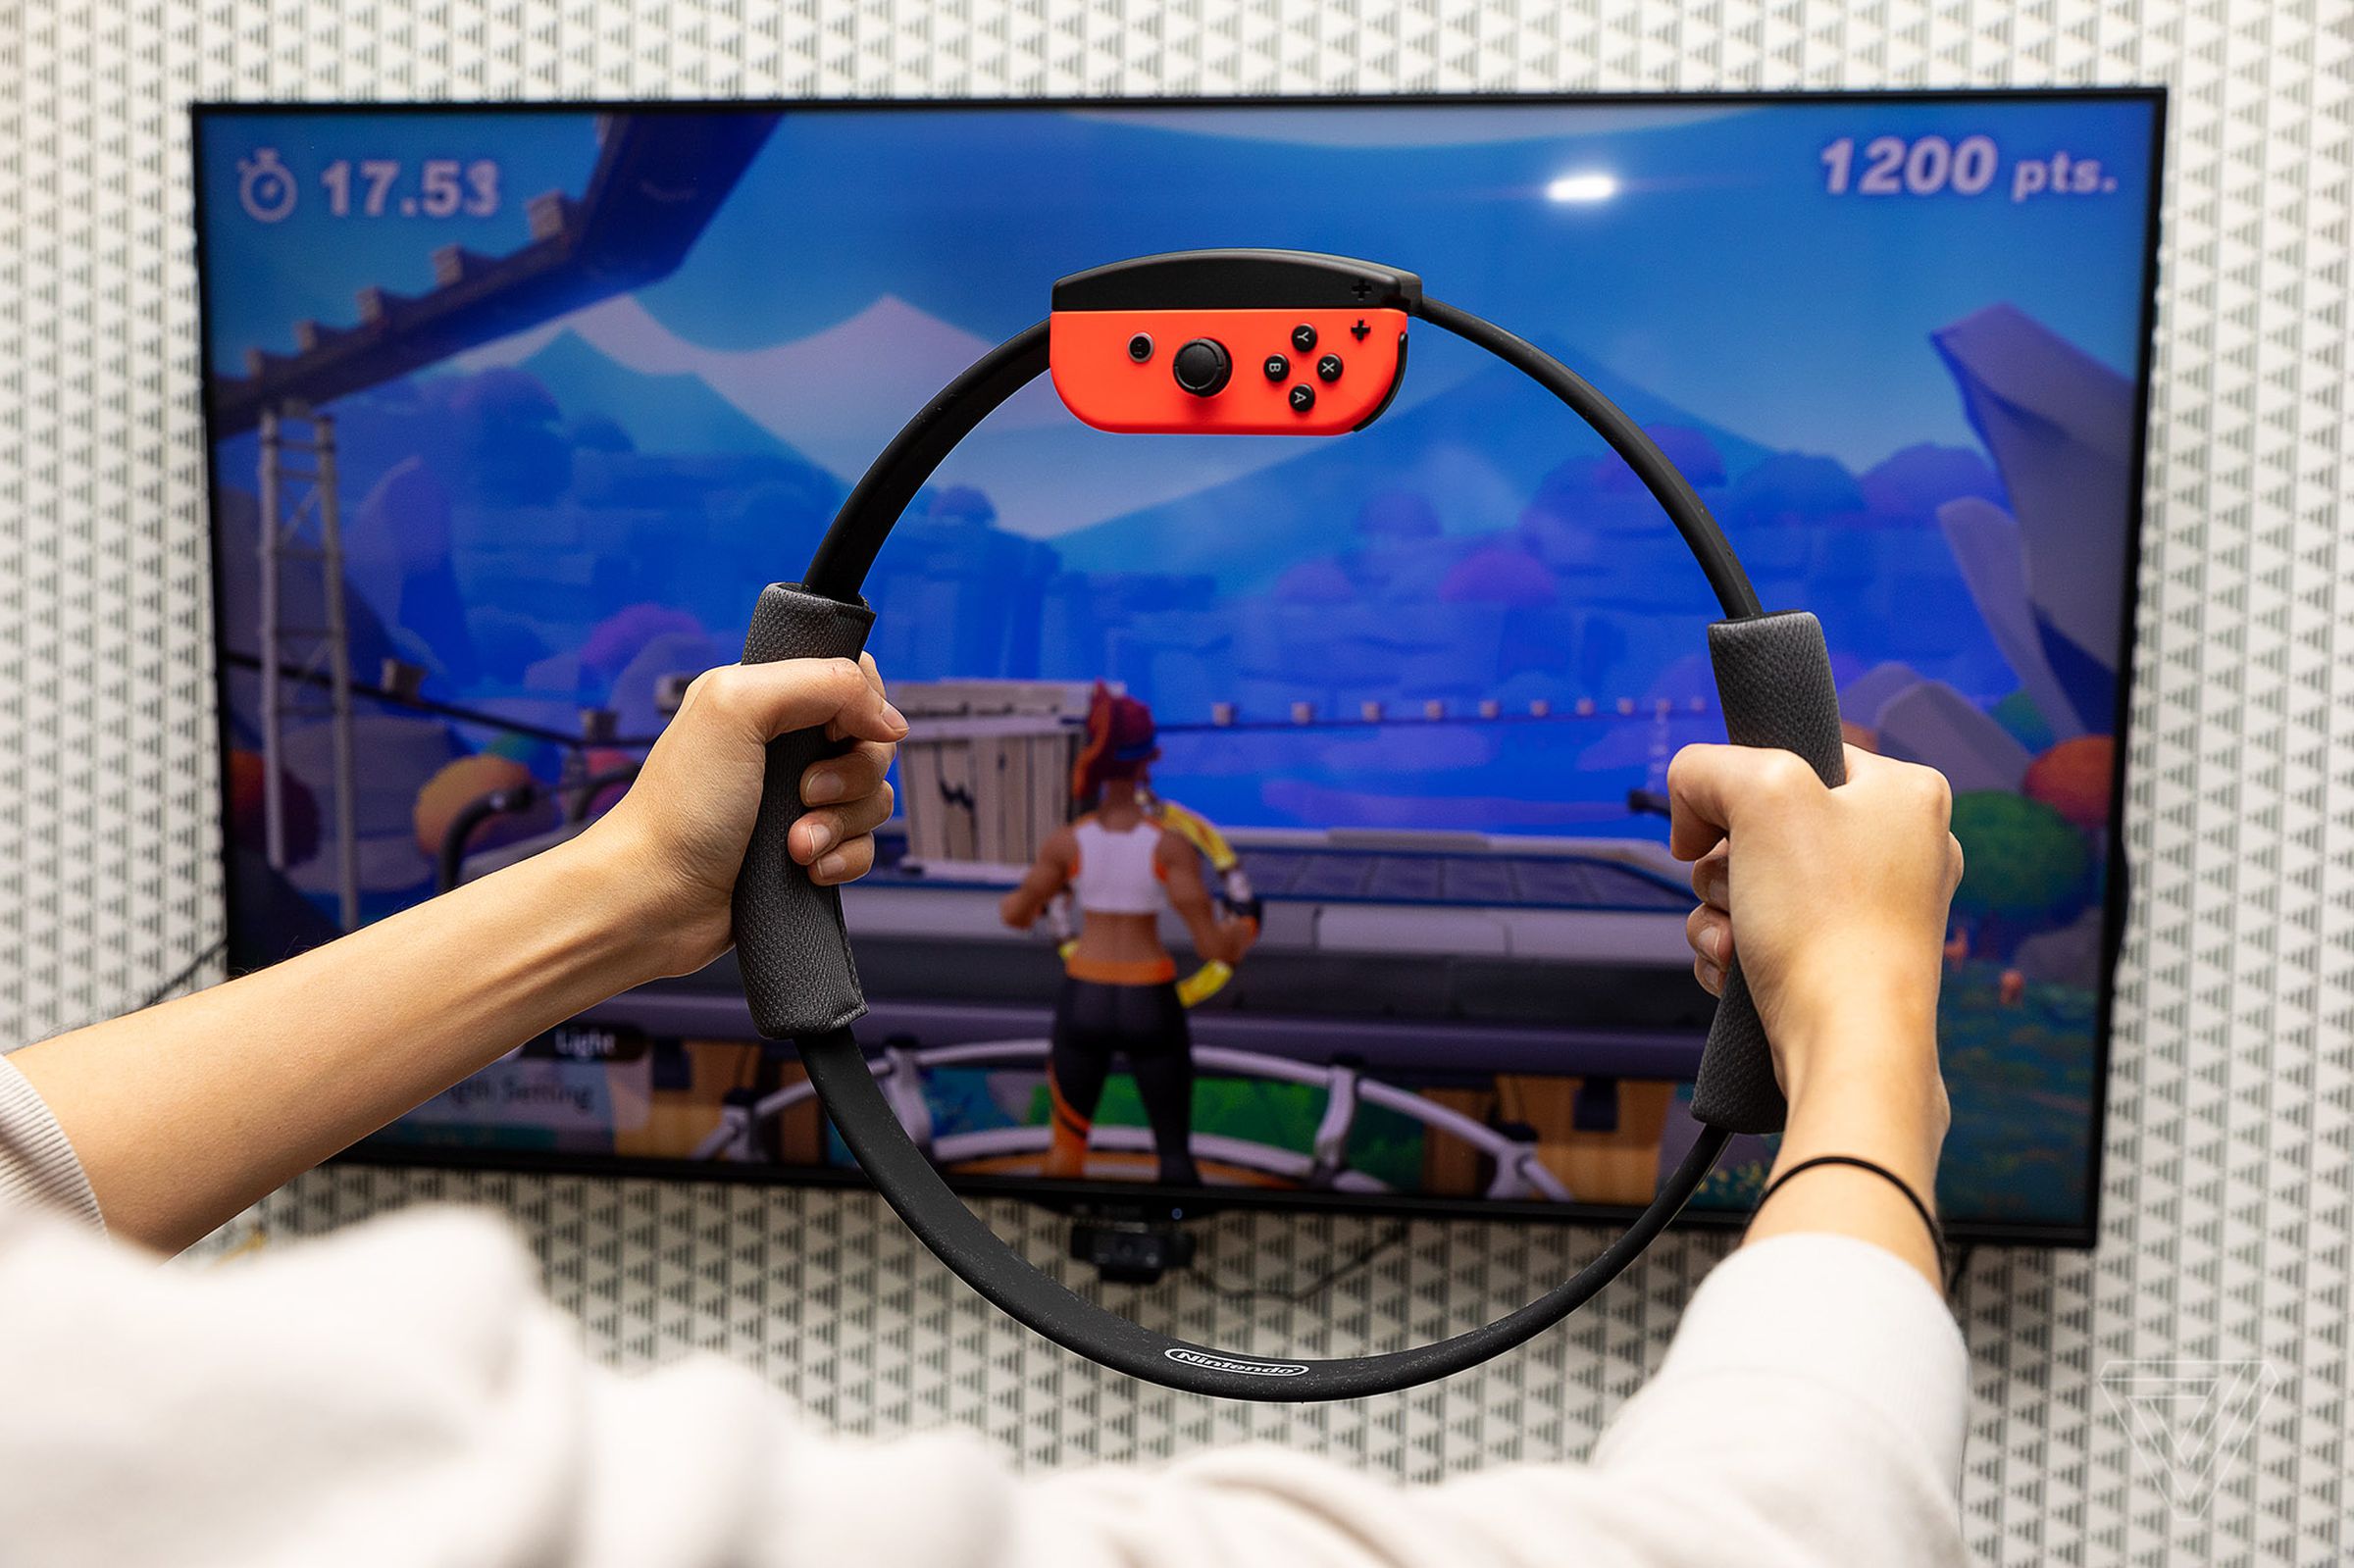 A person holding a Ring Fit Adventure pilates ring controller in front of a wall-mounted TV playing the game.